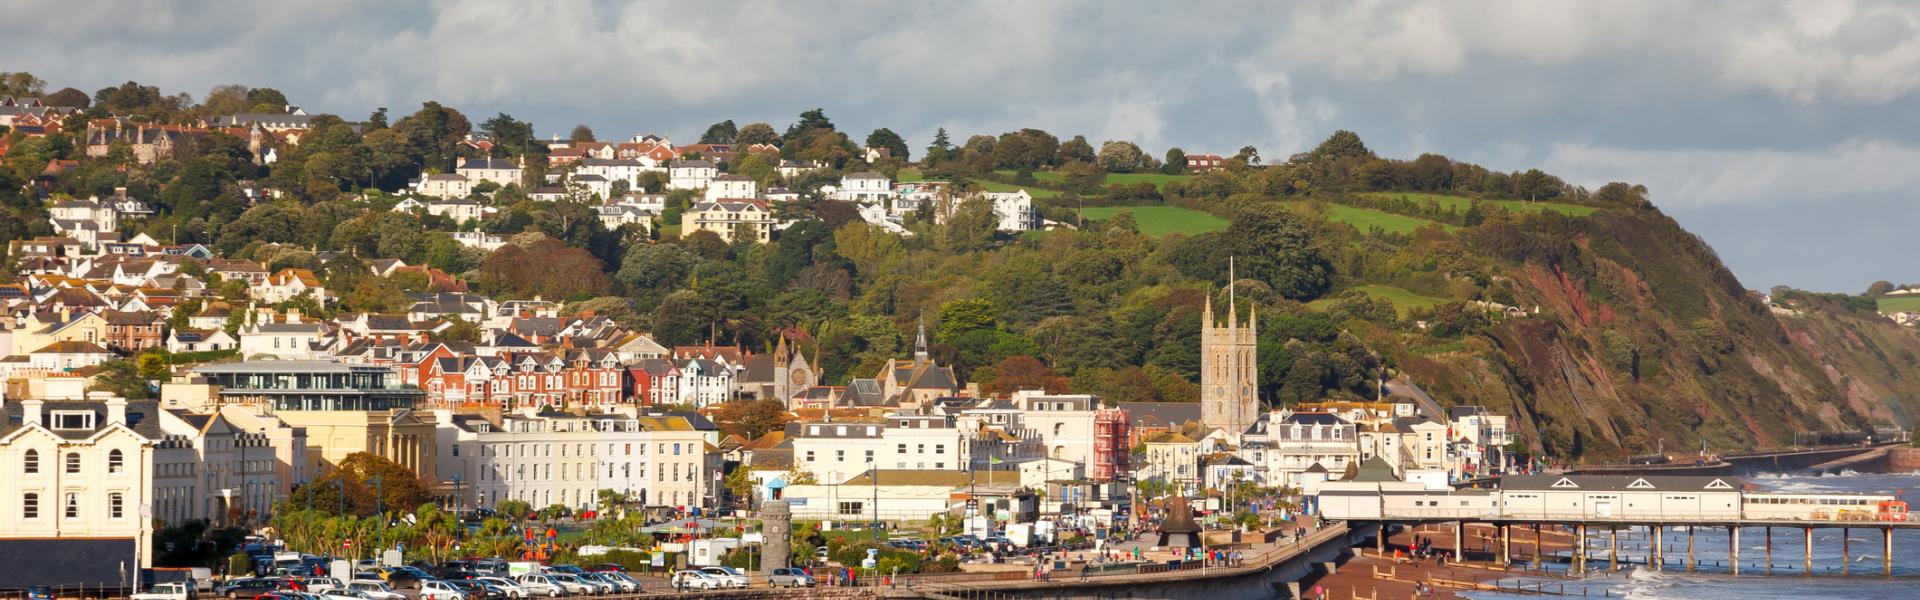 Accommodation in Teignmouth - HomeToGo